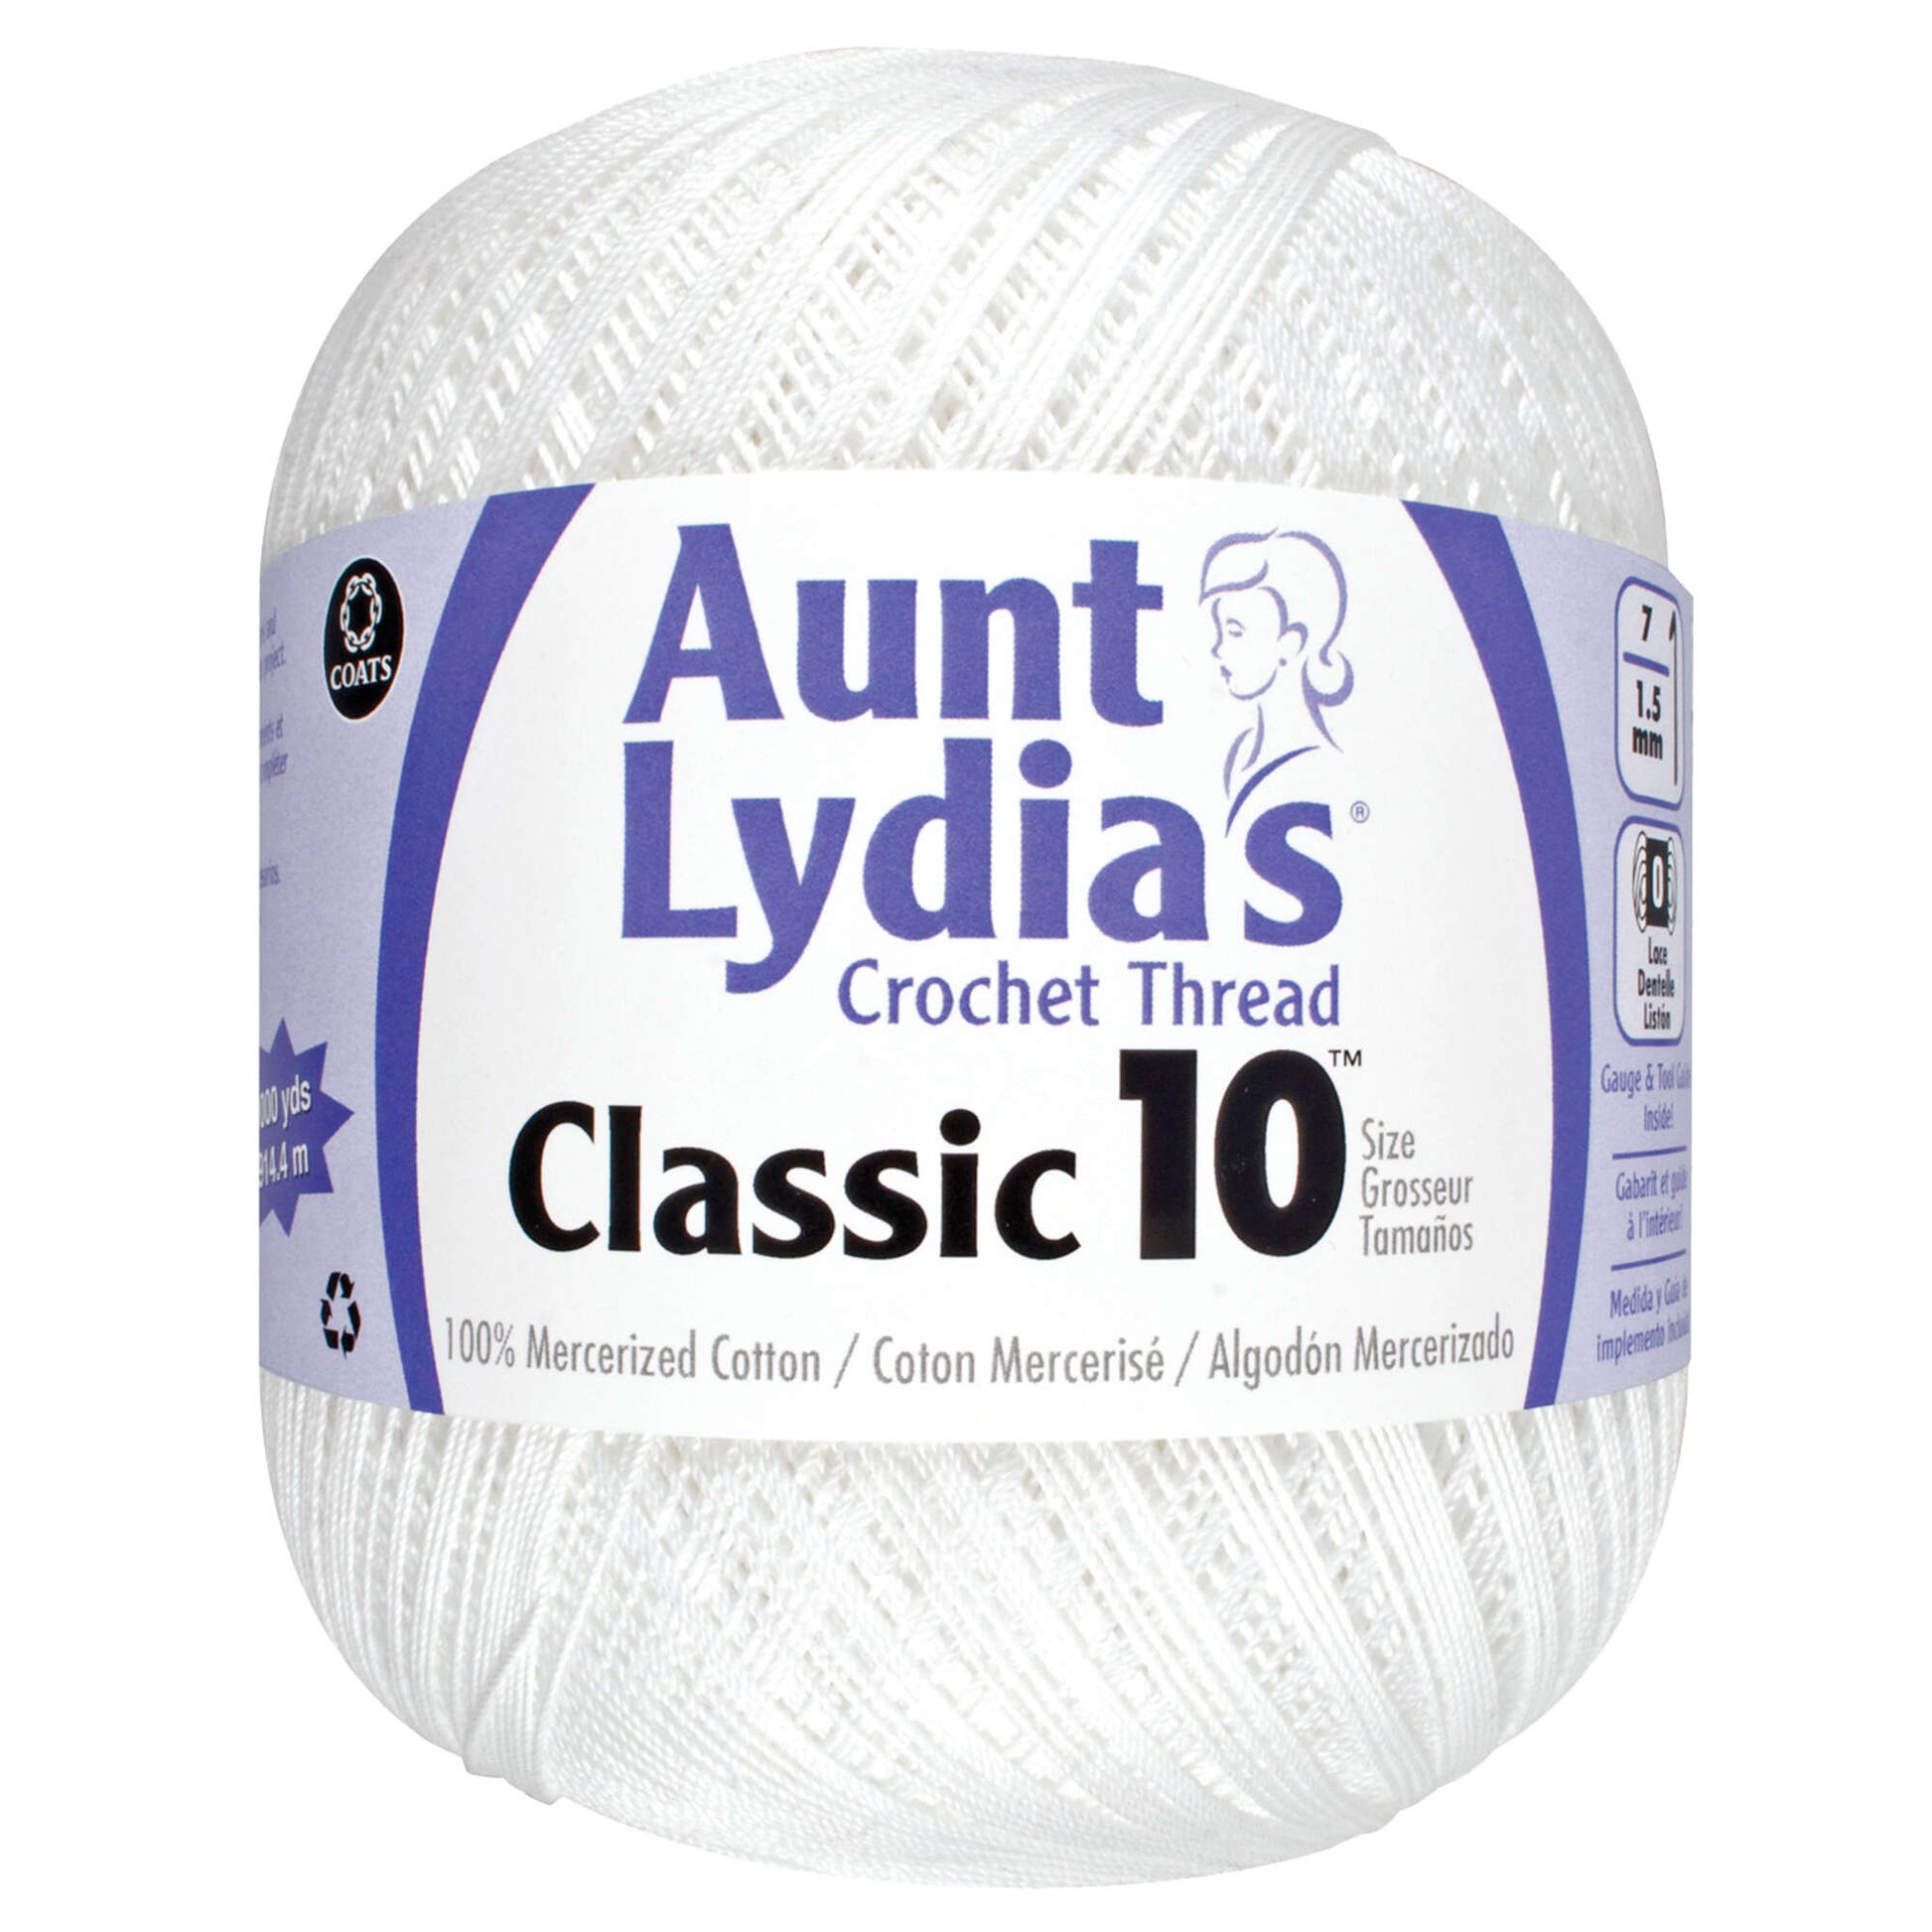 Aunt Lydia's Classic Crochet Thread (Large) Size 10 White